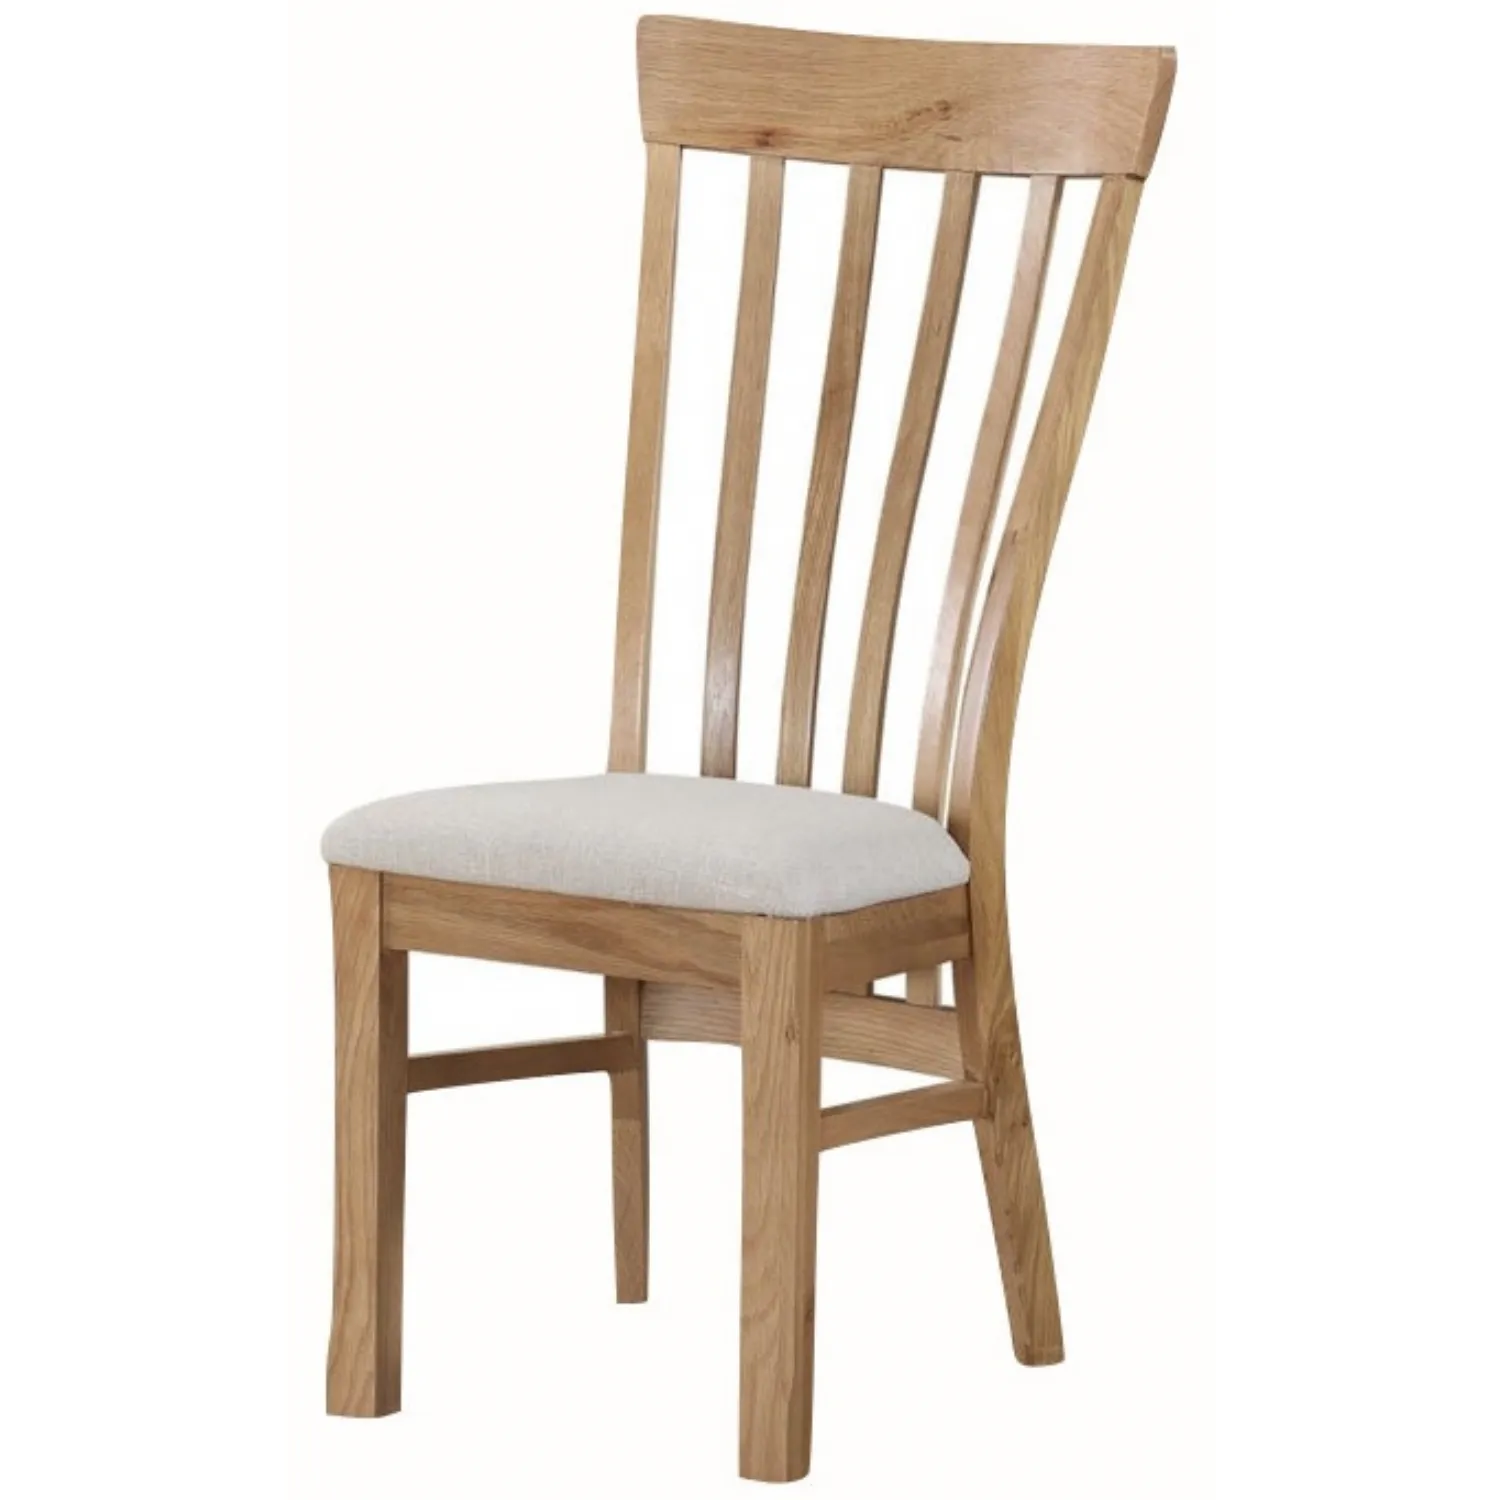 Rustic Solid Oak Dining Chair with Beige Upholstered Seat